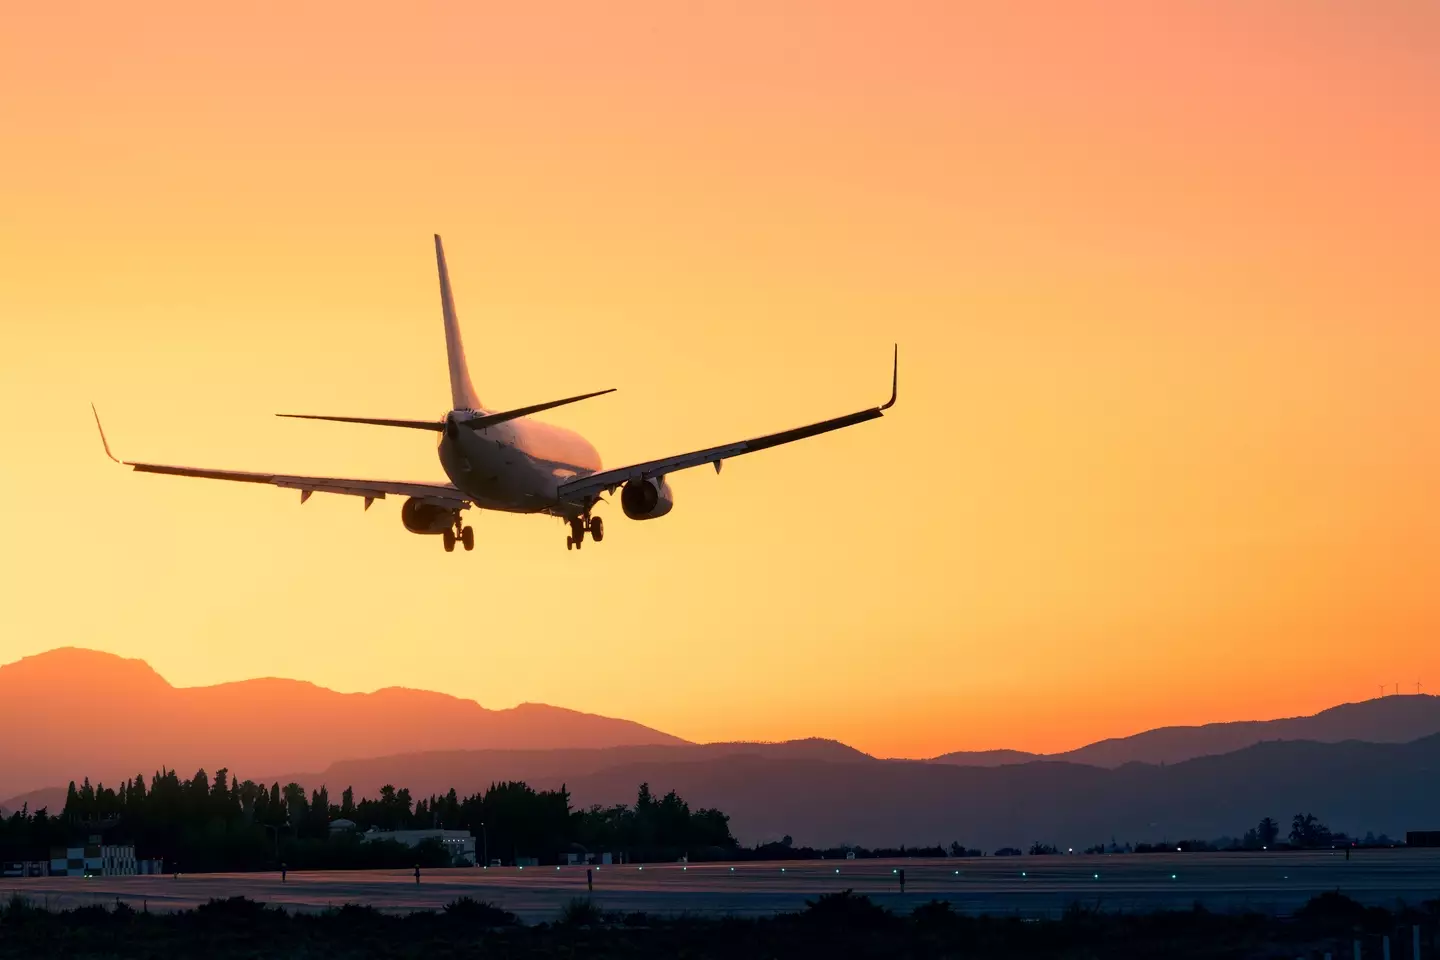 The plane disappeared without a trace. (Getty stock image)